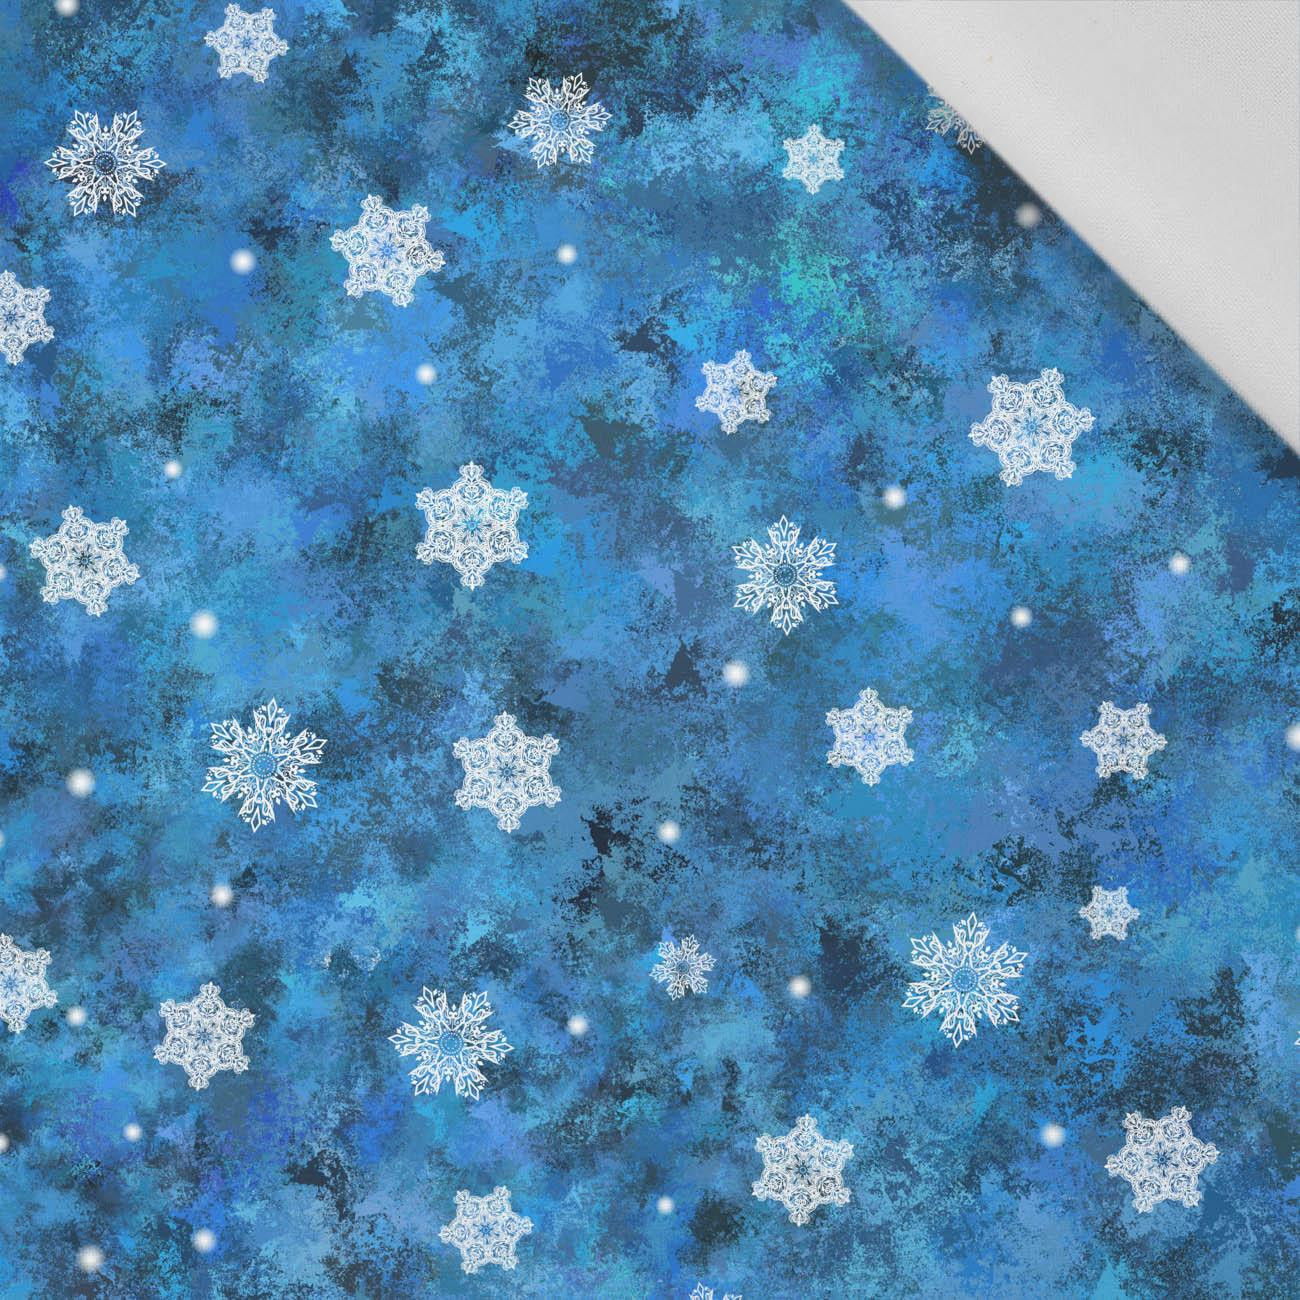 SNOWFLAKES PAT. 3 (WINTER IS COMING) - Cotton woven fabric